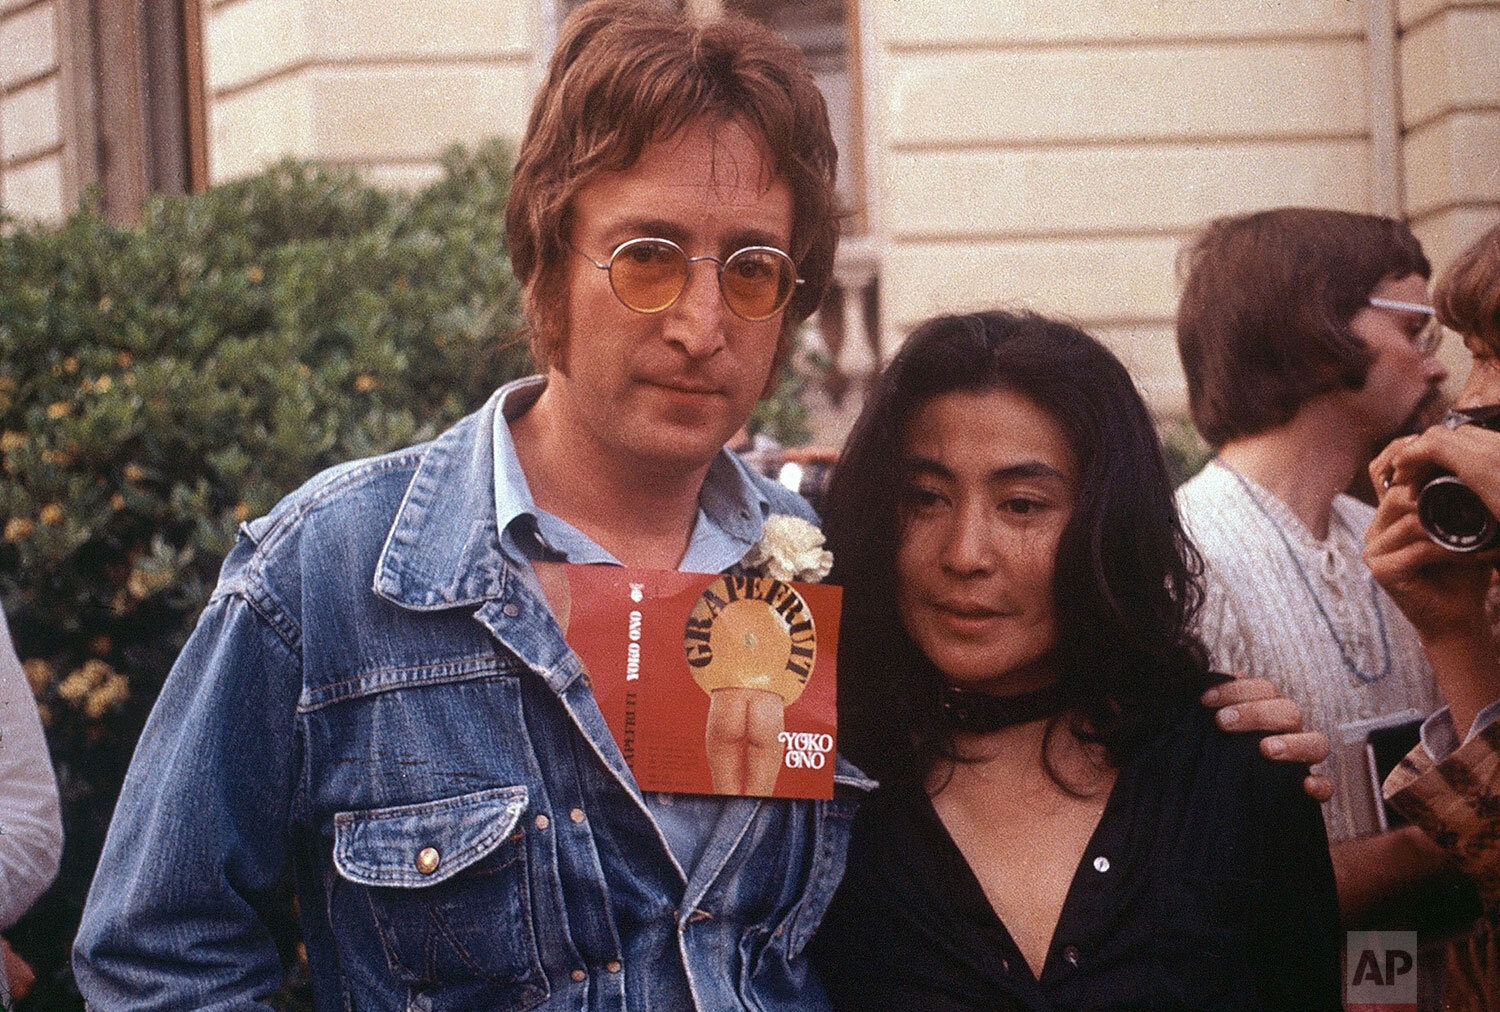  John Lennon and his wife Yoko Ono are seen at the Cannes Film Festival, May 18, 1971.  Lennon carries Ono's art book "Grapefruit" in his jacket. (AP Photo/Michel Lipchitz) 